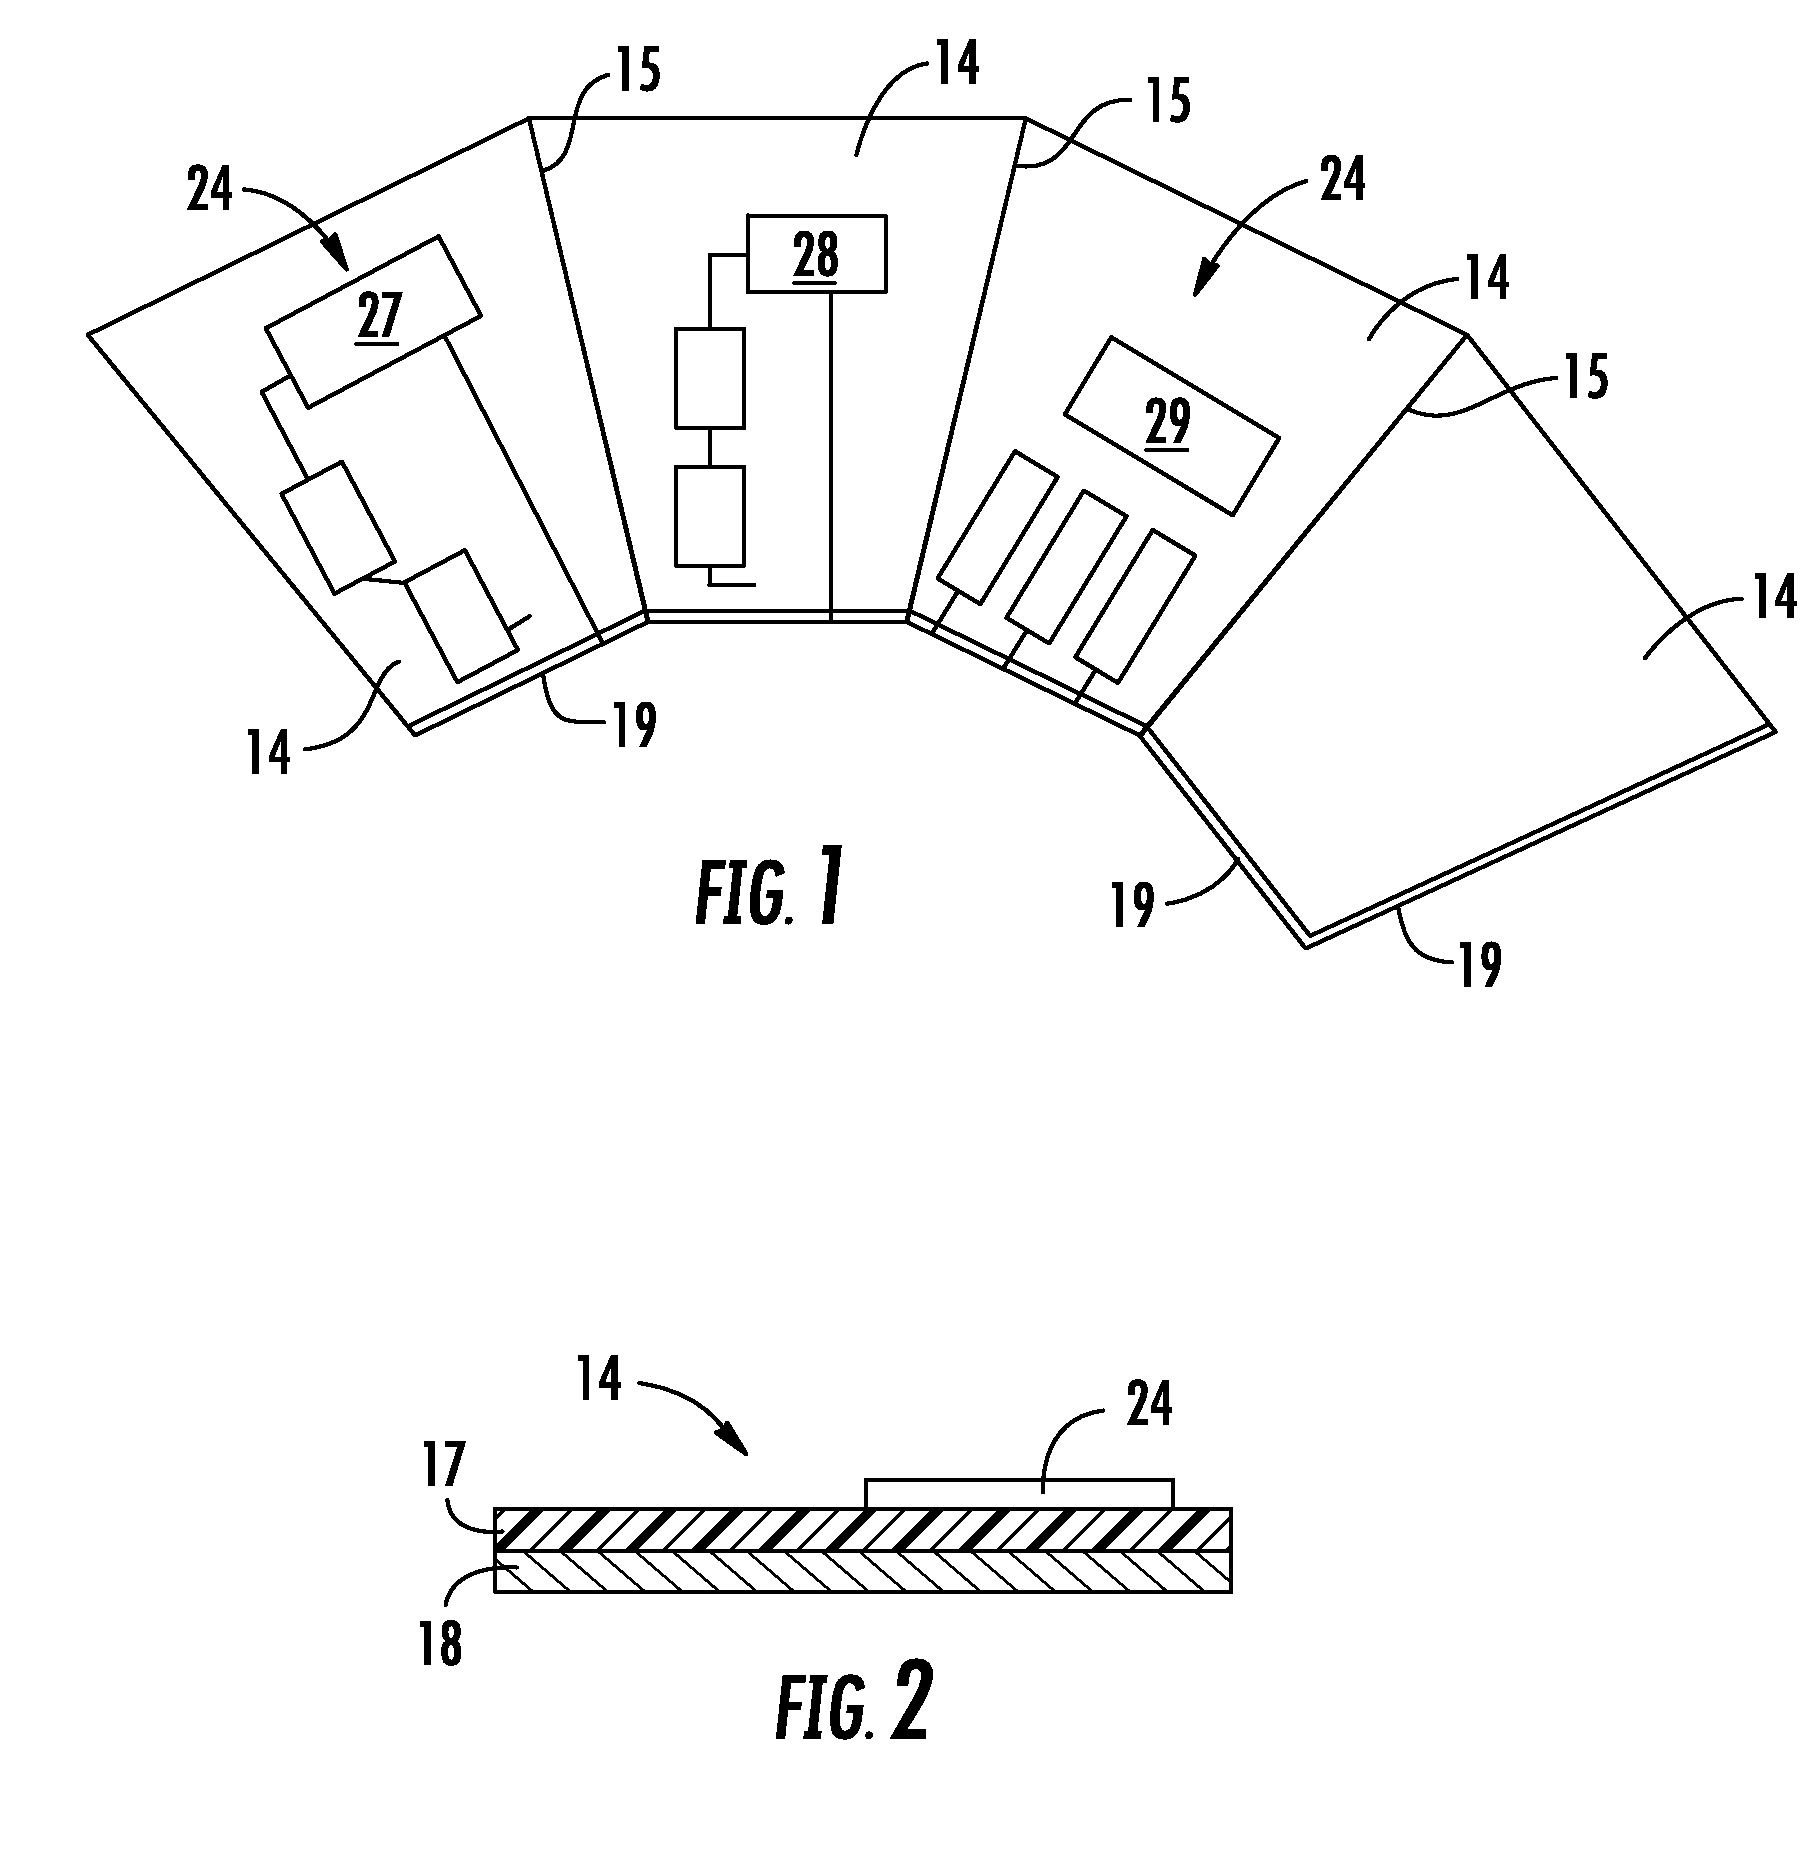 Horn antenna including integrated electronics and associated method